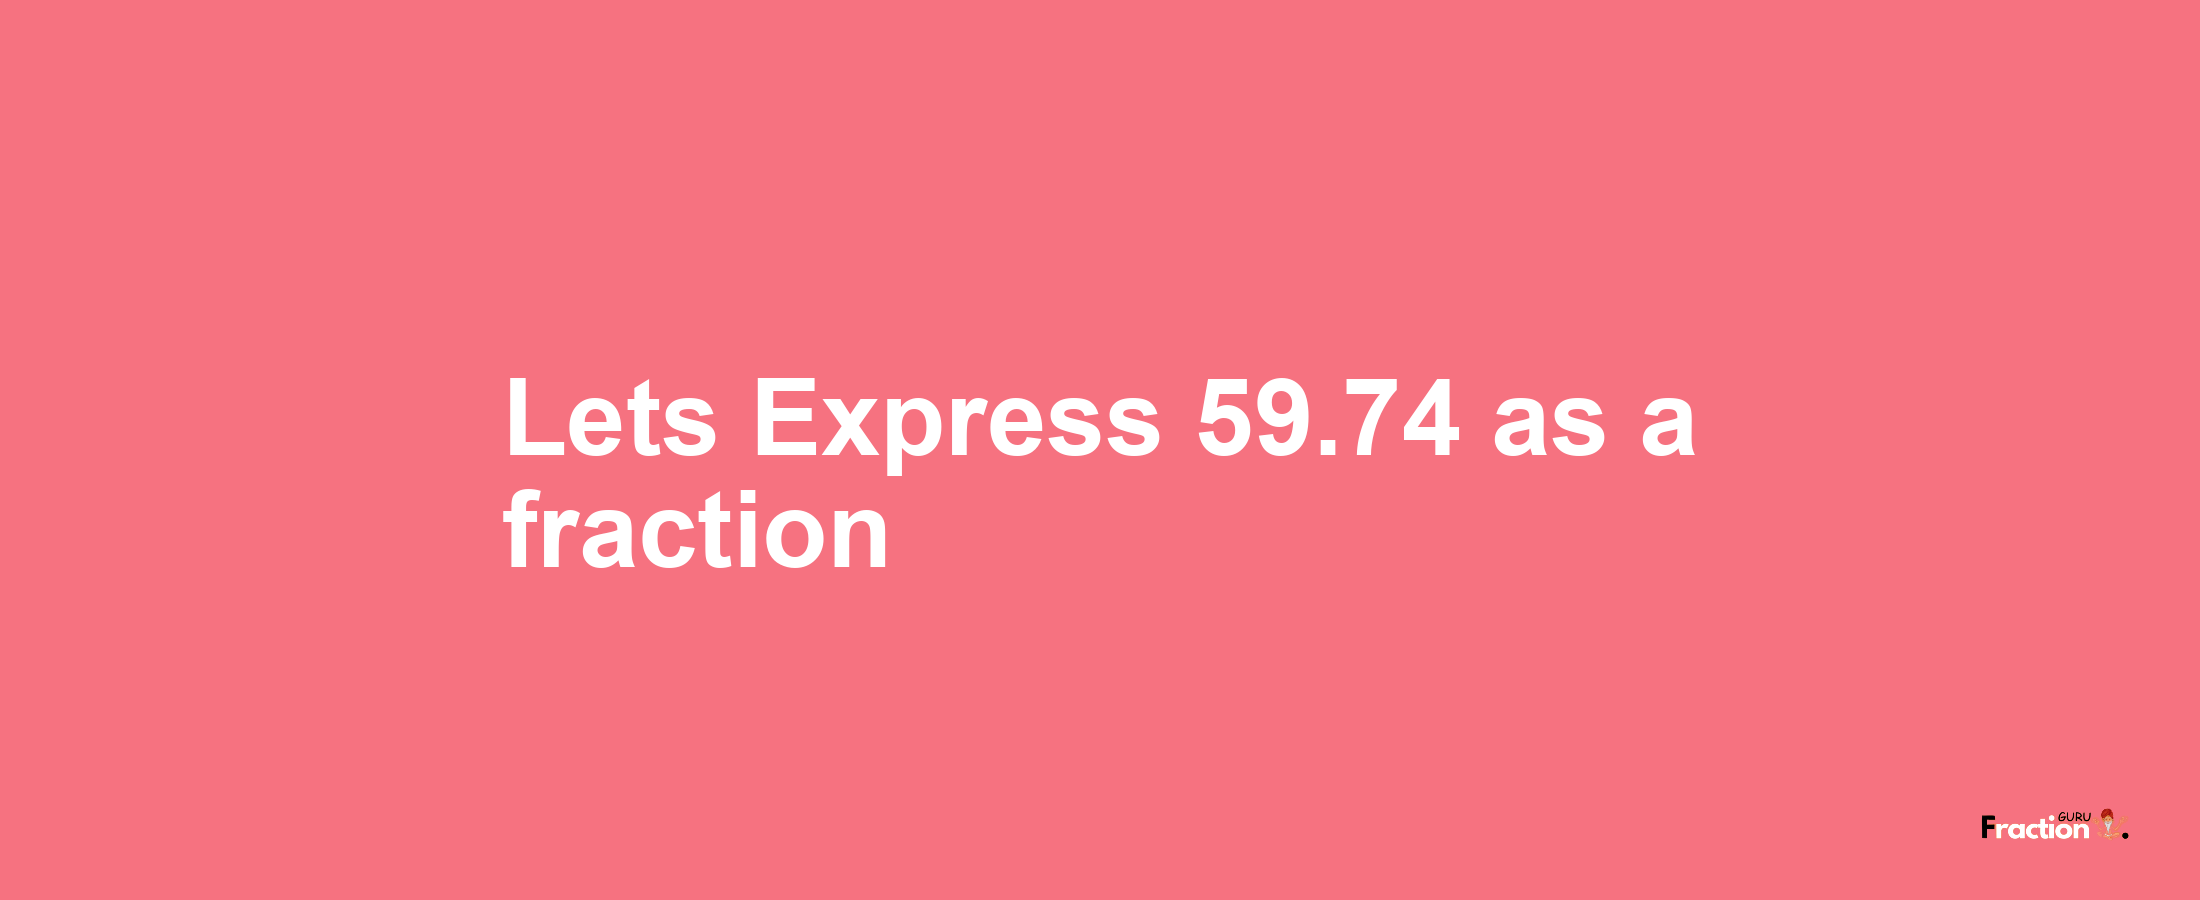 Lets Express 59.74 as afraction